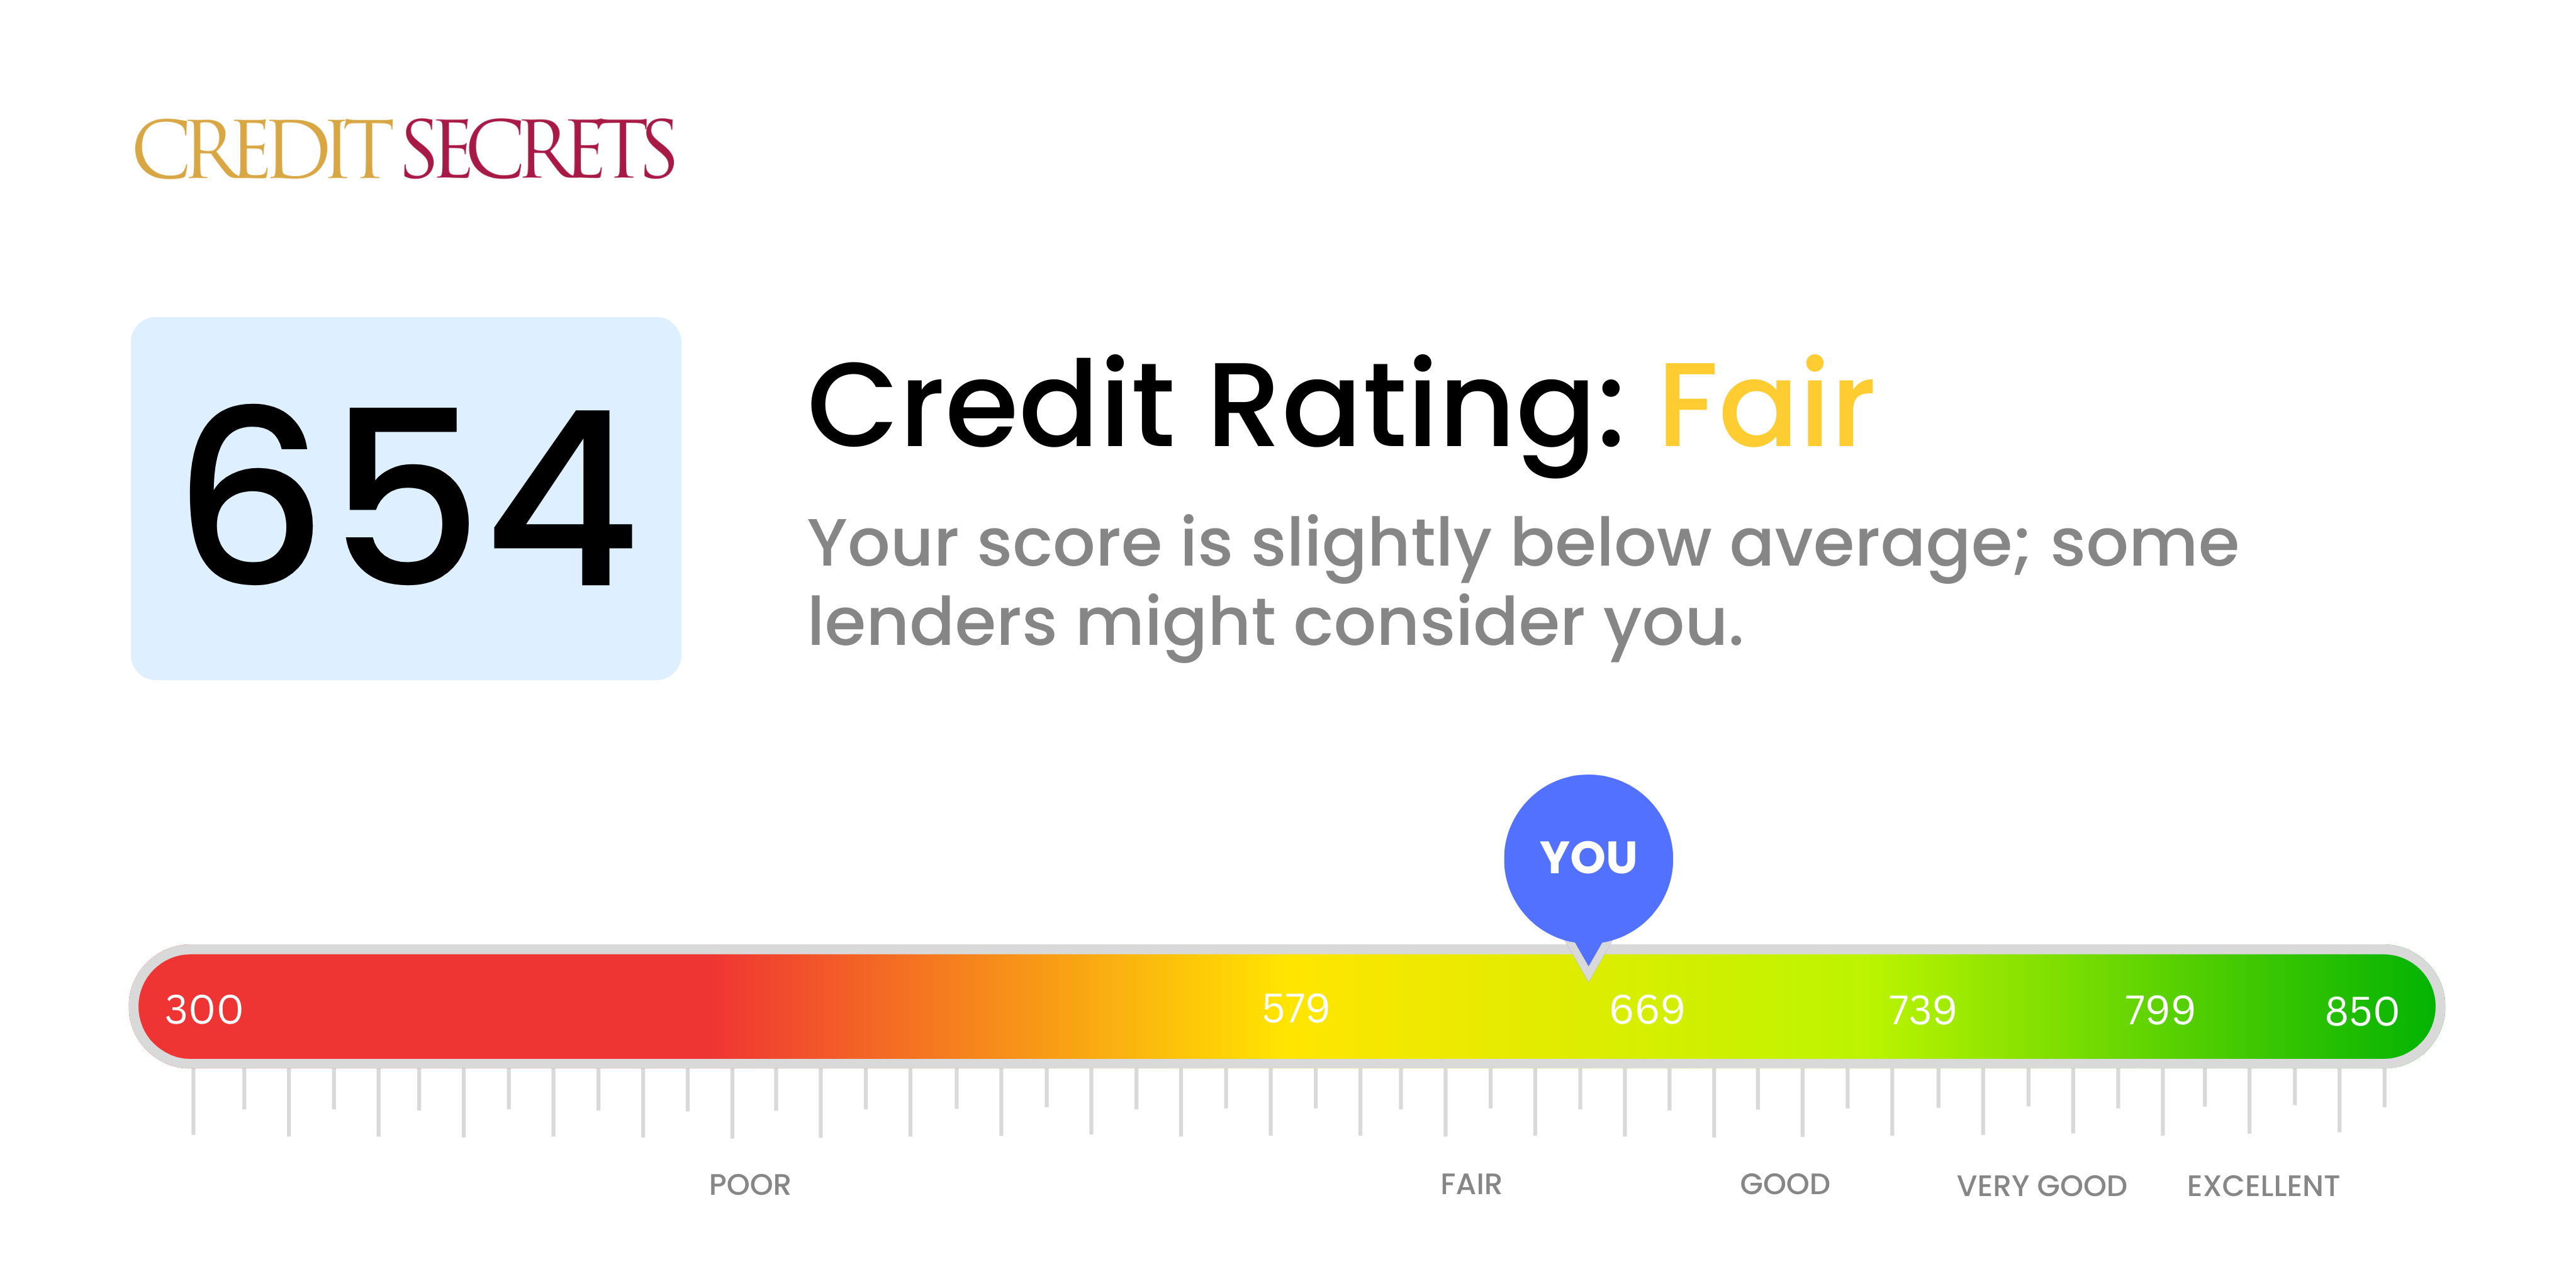 Is 654 a good credit score?